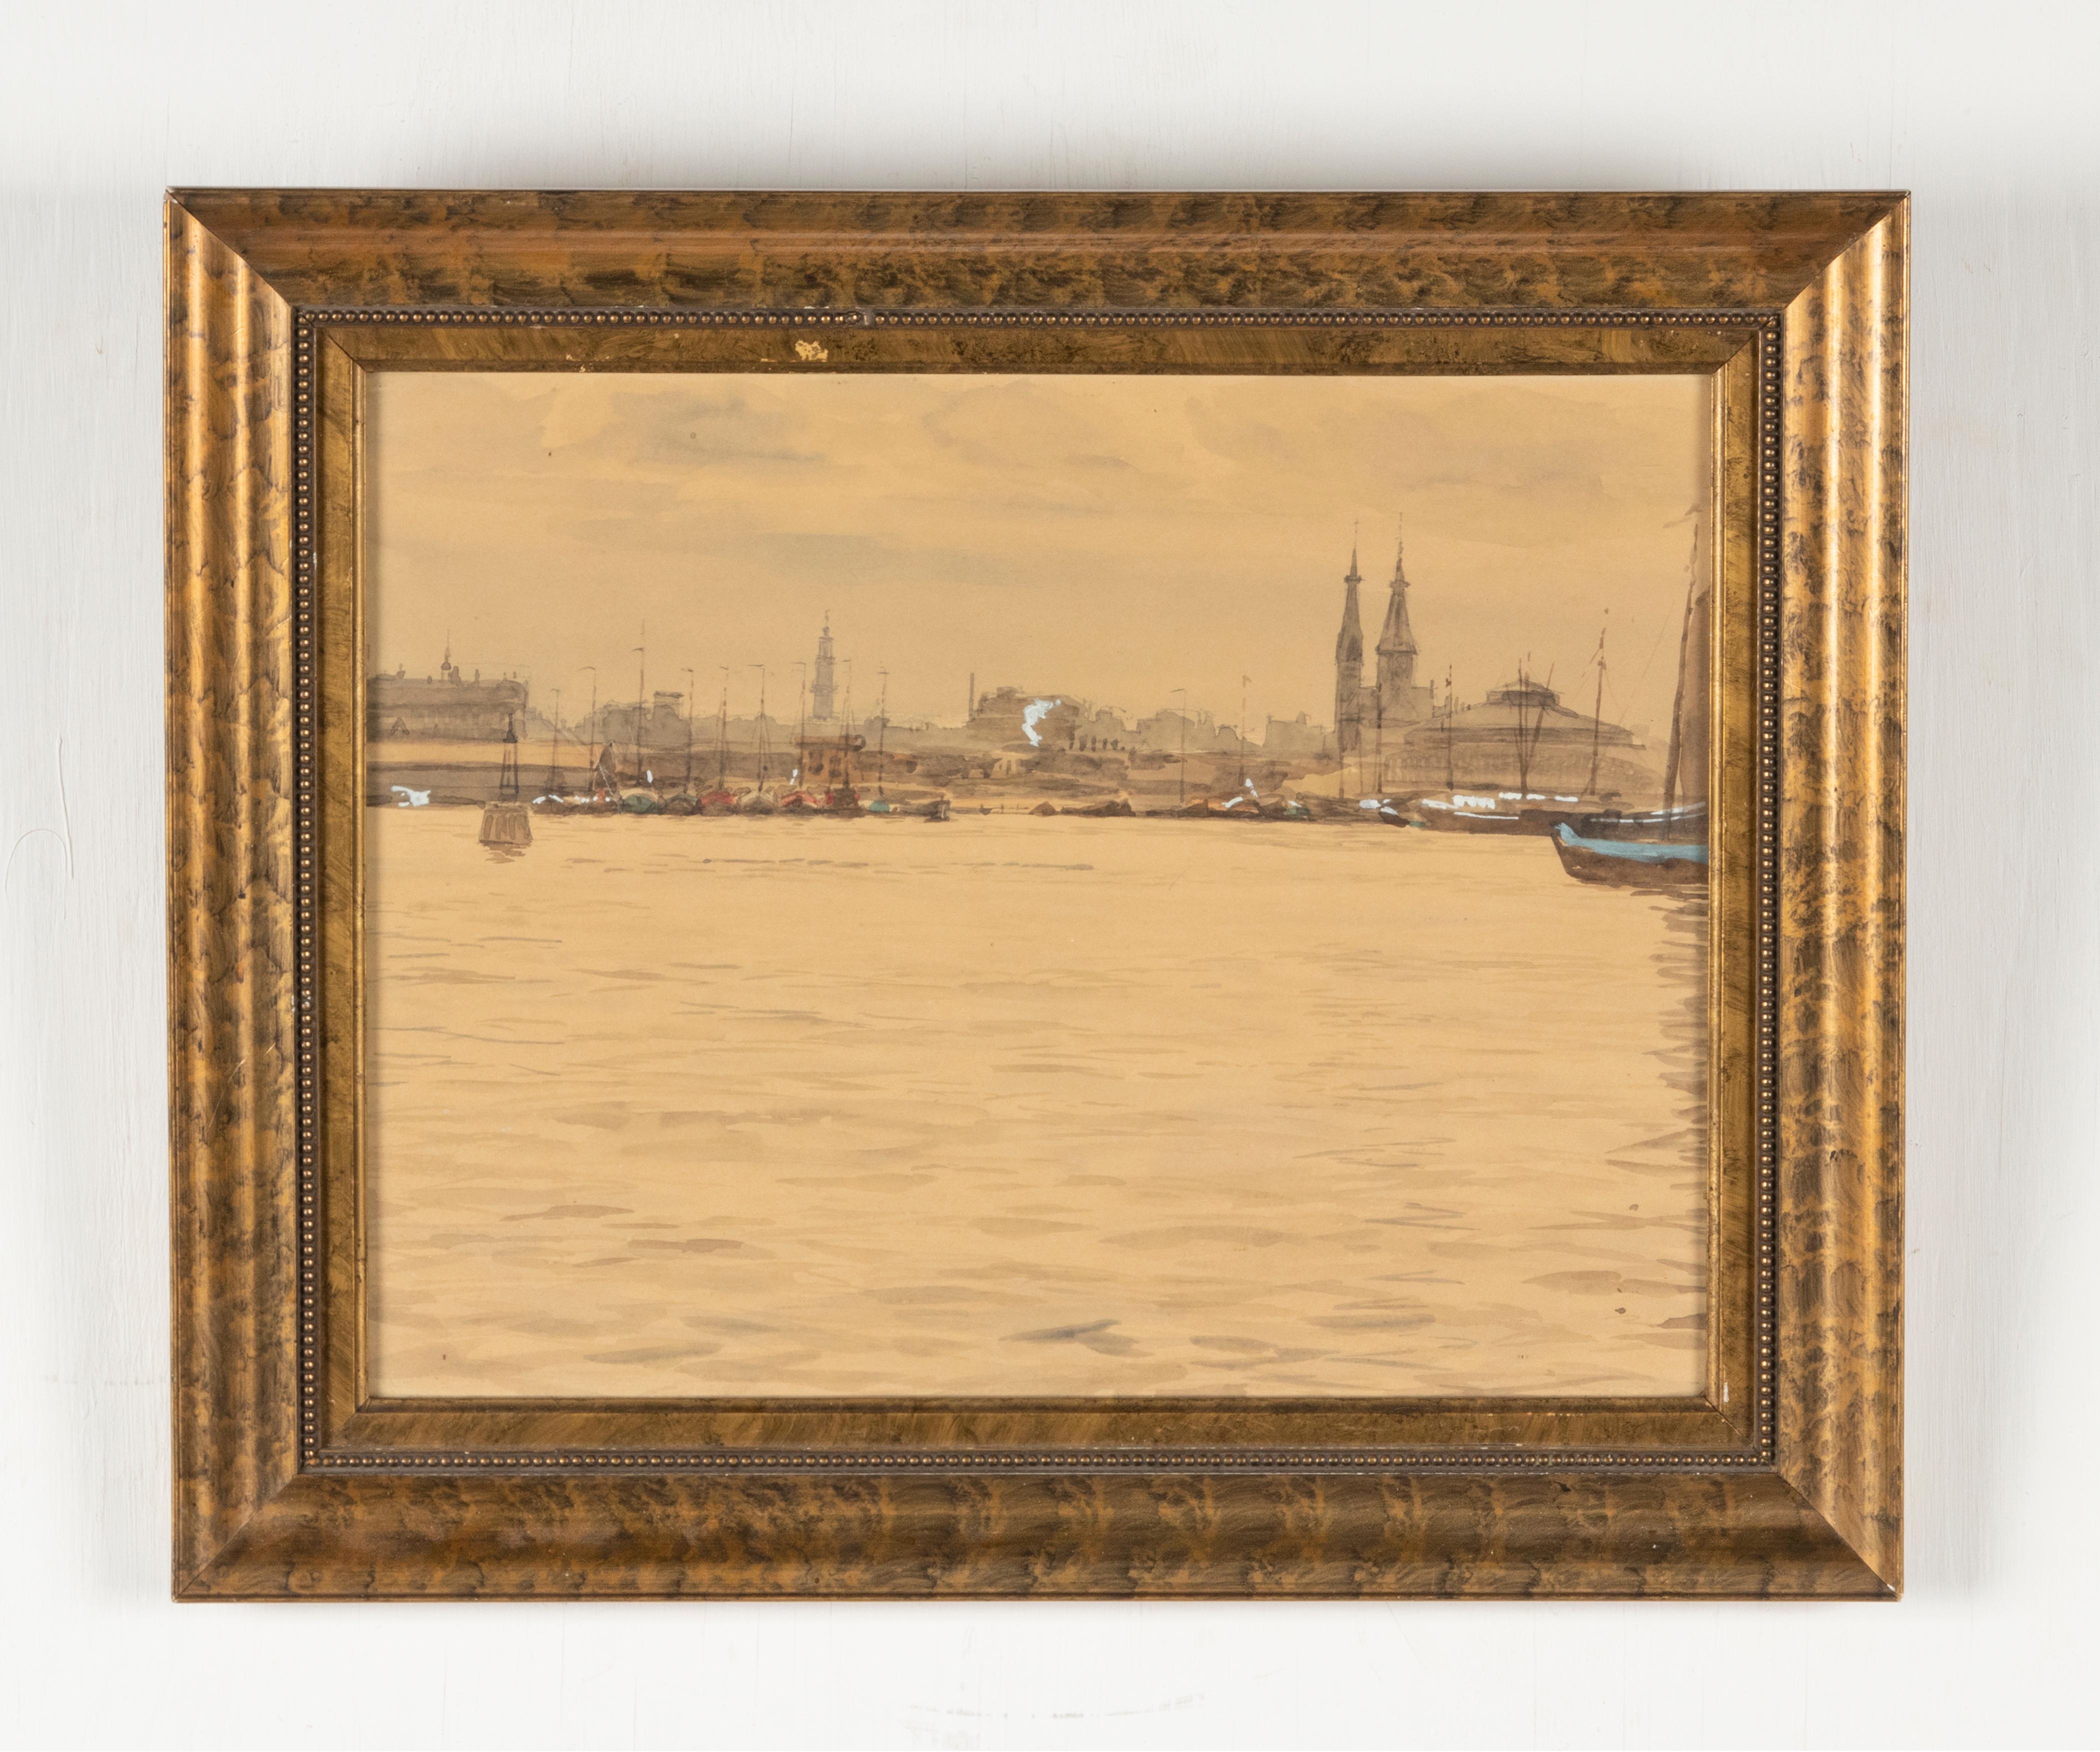 Decorative old watercolor of a harbor view. The work is not signed, maker unknown. With beautiful fine lines and a surefire touch. With a wooden hand painted frame, frames behind glass. 

Dimension frame: 41 x 34 cm
Dimensions painting: 32 x 25